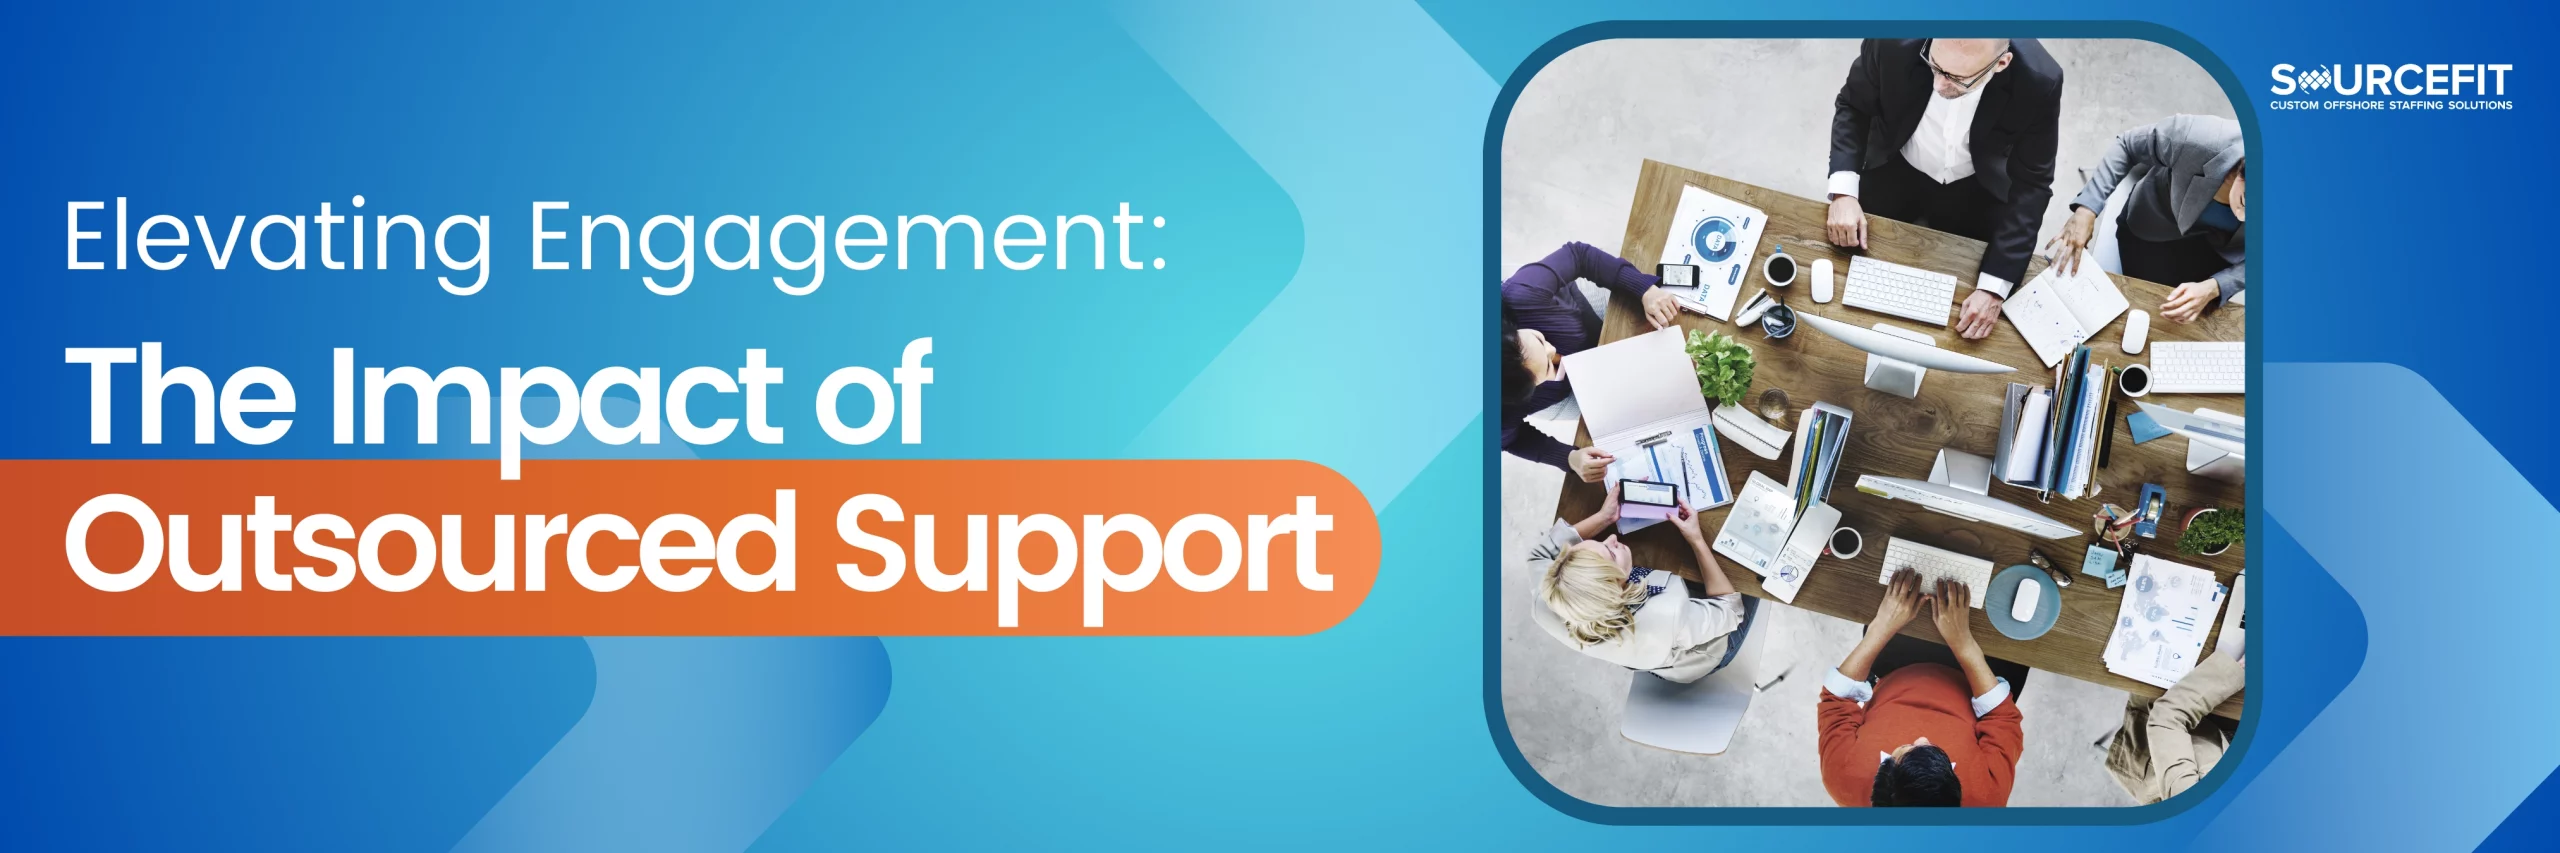 Elevating Engagement The Impact of Outsourced Support